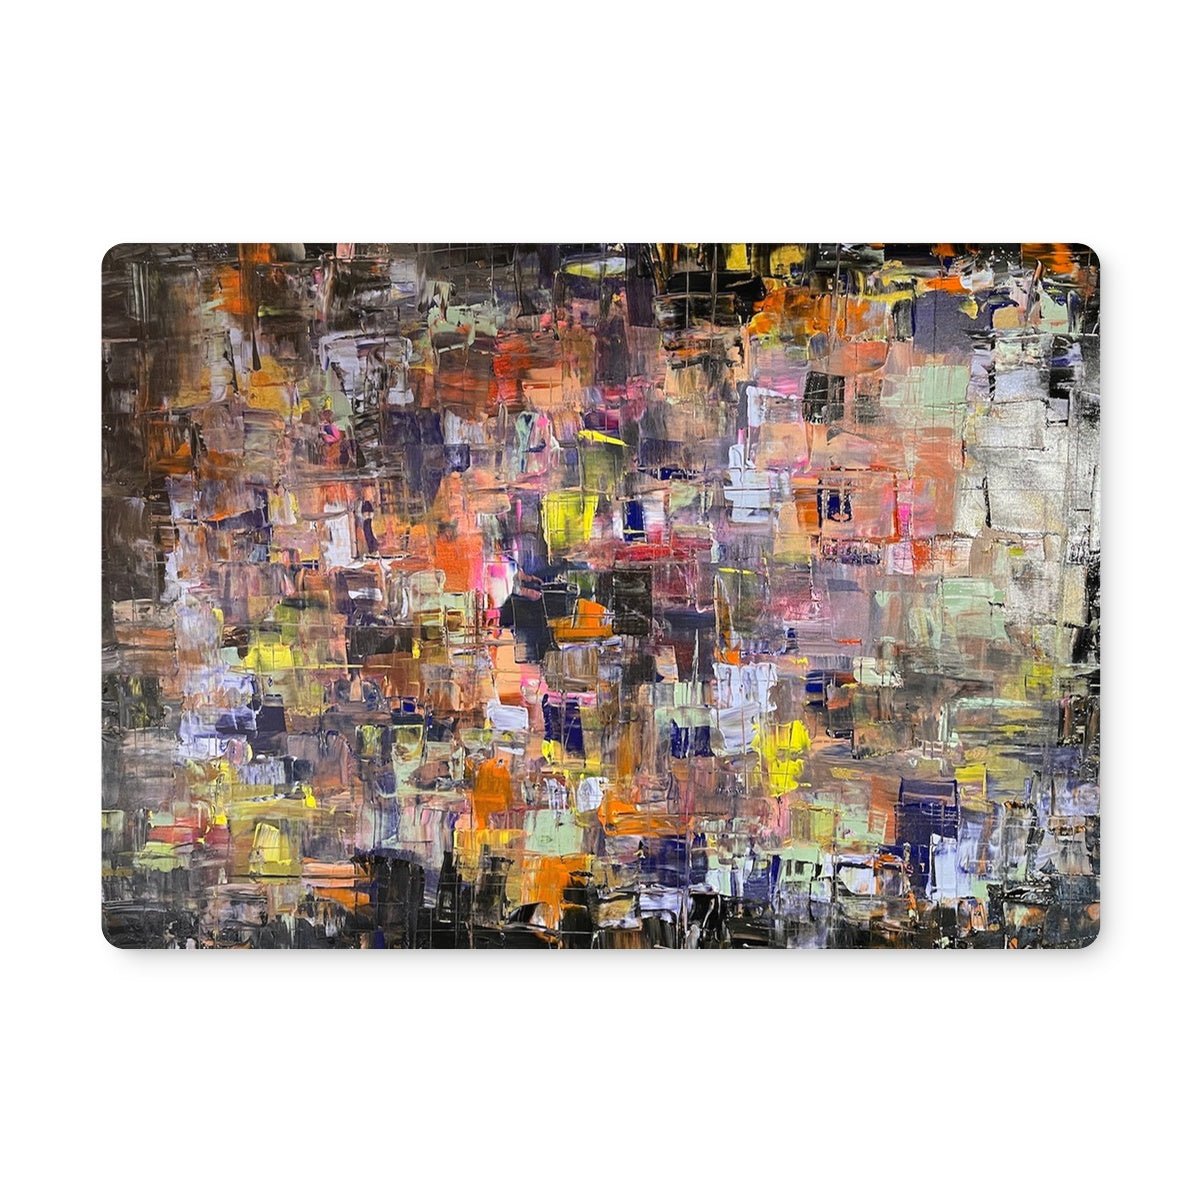 Never Enough Art Gifts Placemat-Placemats-Abstract & Impressionistic Art Gallery-2 Placemats-Paintings, Prints, Homeware, Art Gifts From Scotland By Scottish Artist Kevin Hunter